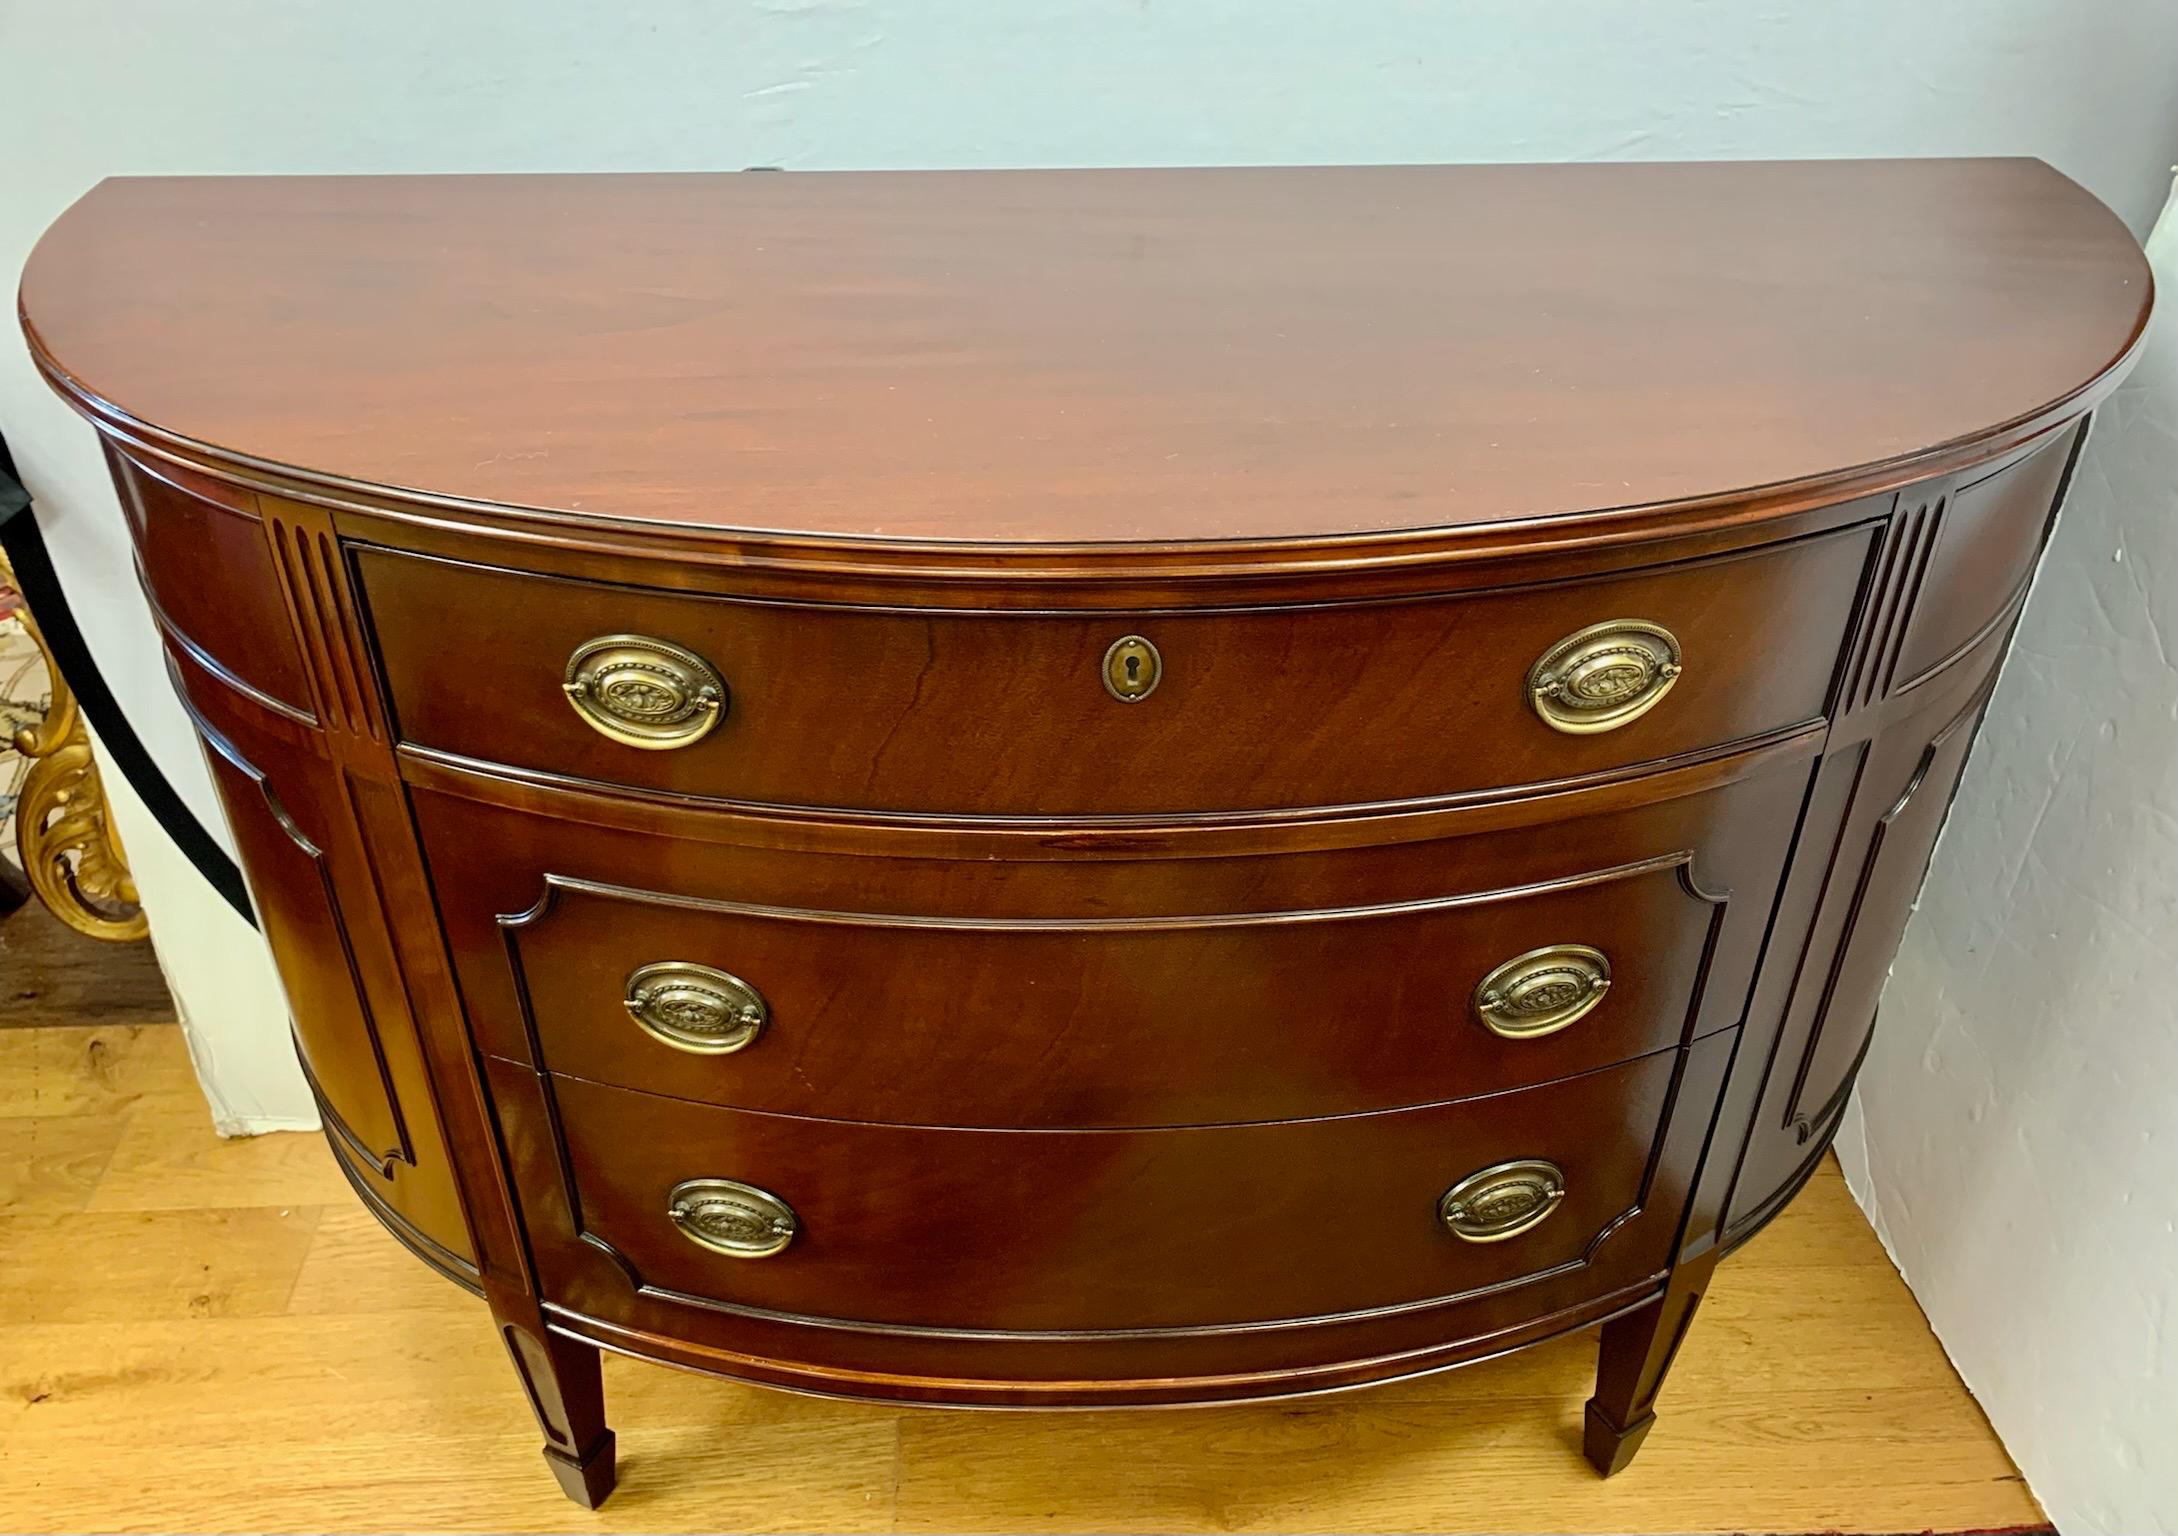 Classic high quality mahogany chest of drawers with curved front and three spacious dovetailed drawers with original brass plates. Well crafted, Made in the USA.